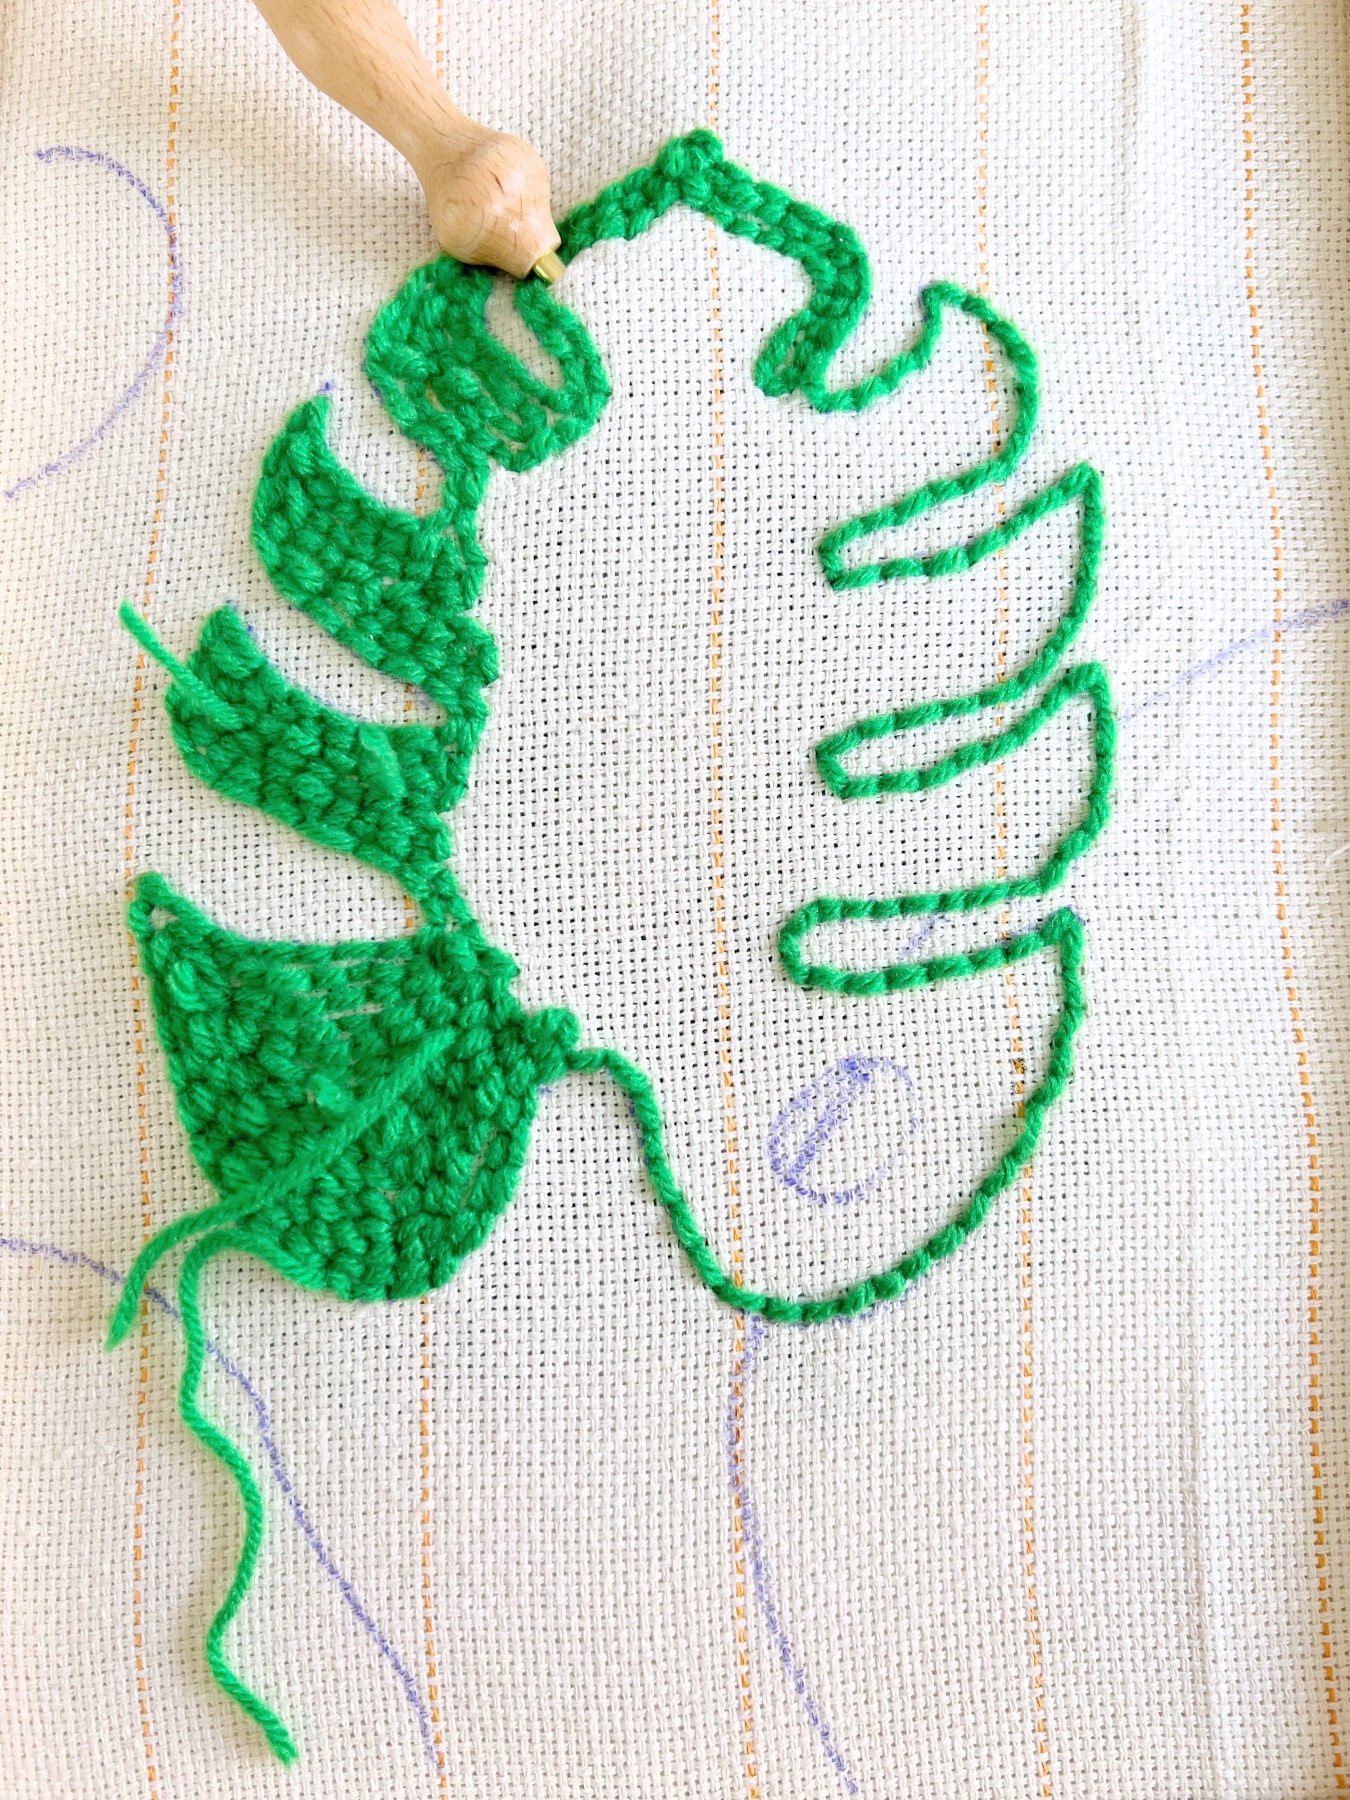 continue to layer and layer the stitches